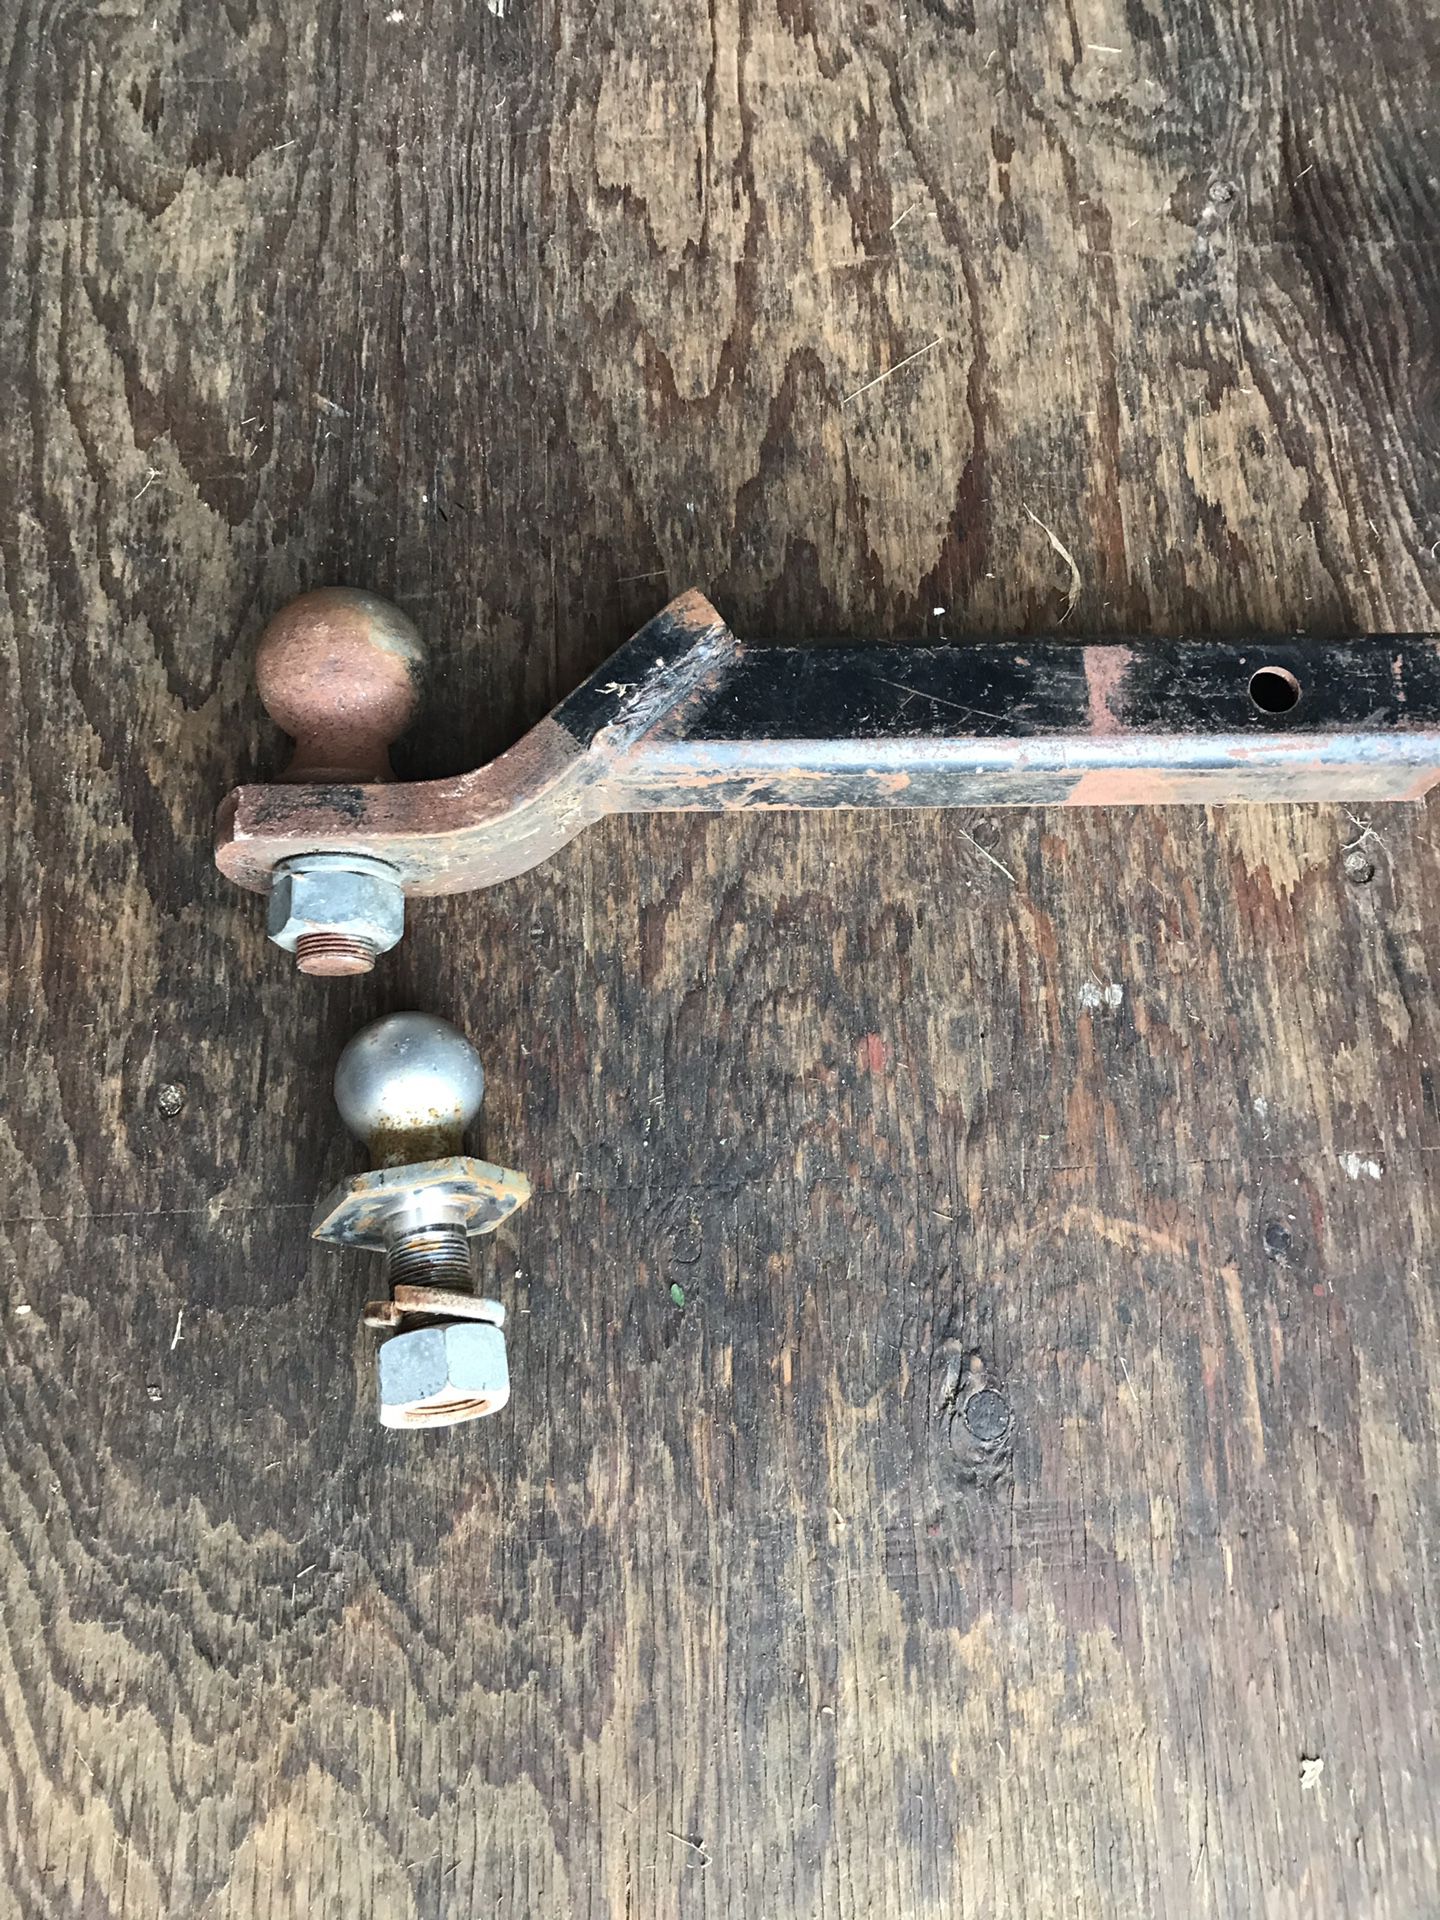 Long class III trailer hitch with two balls